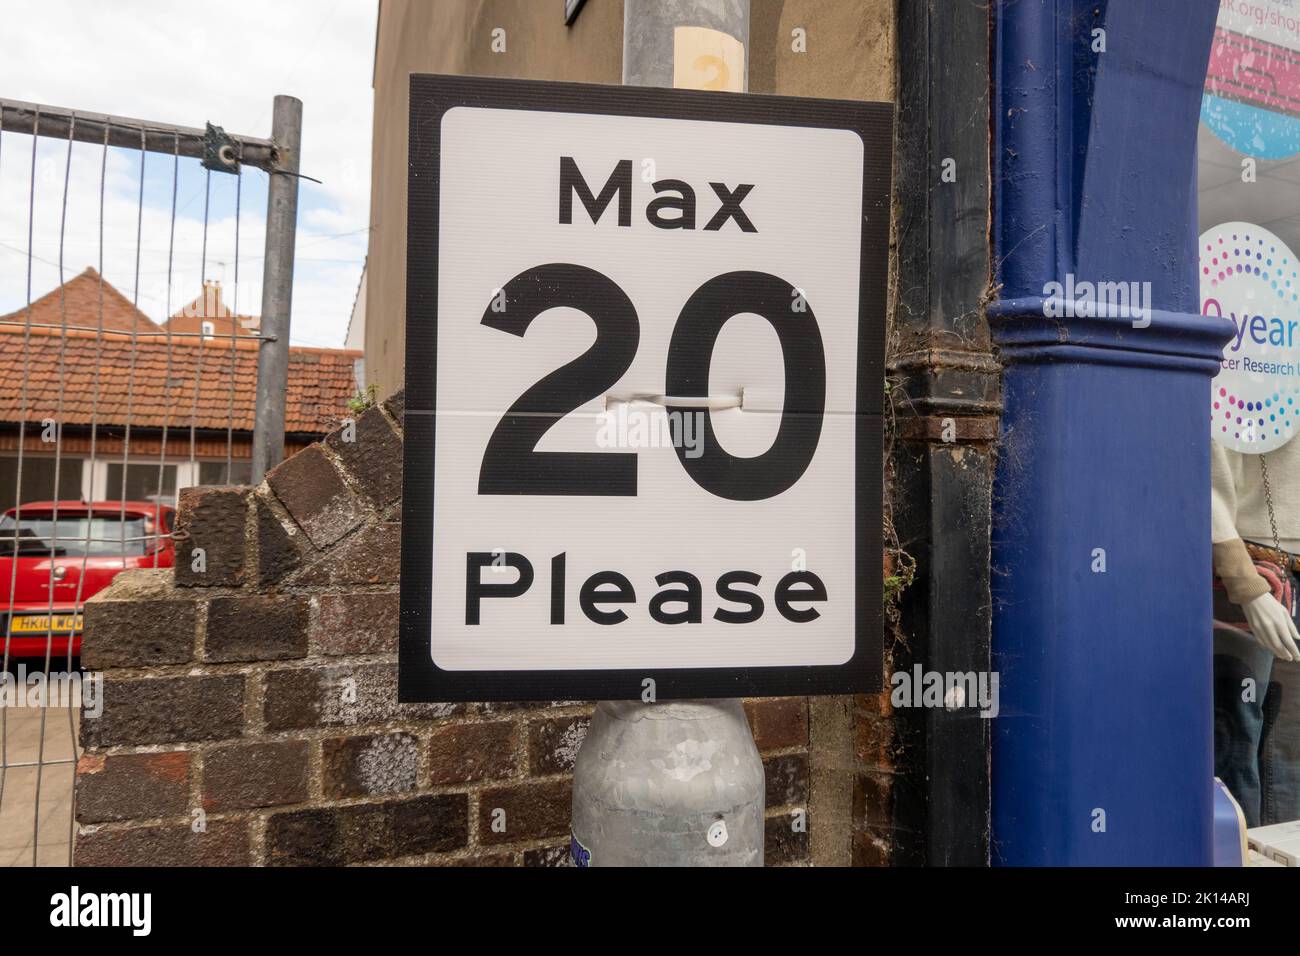 Max twenty please sign on a lamppost Stock Photo